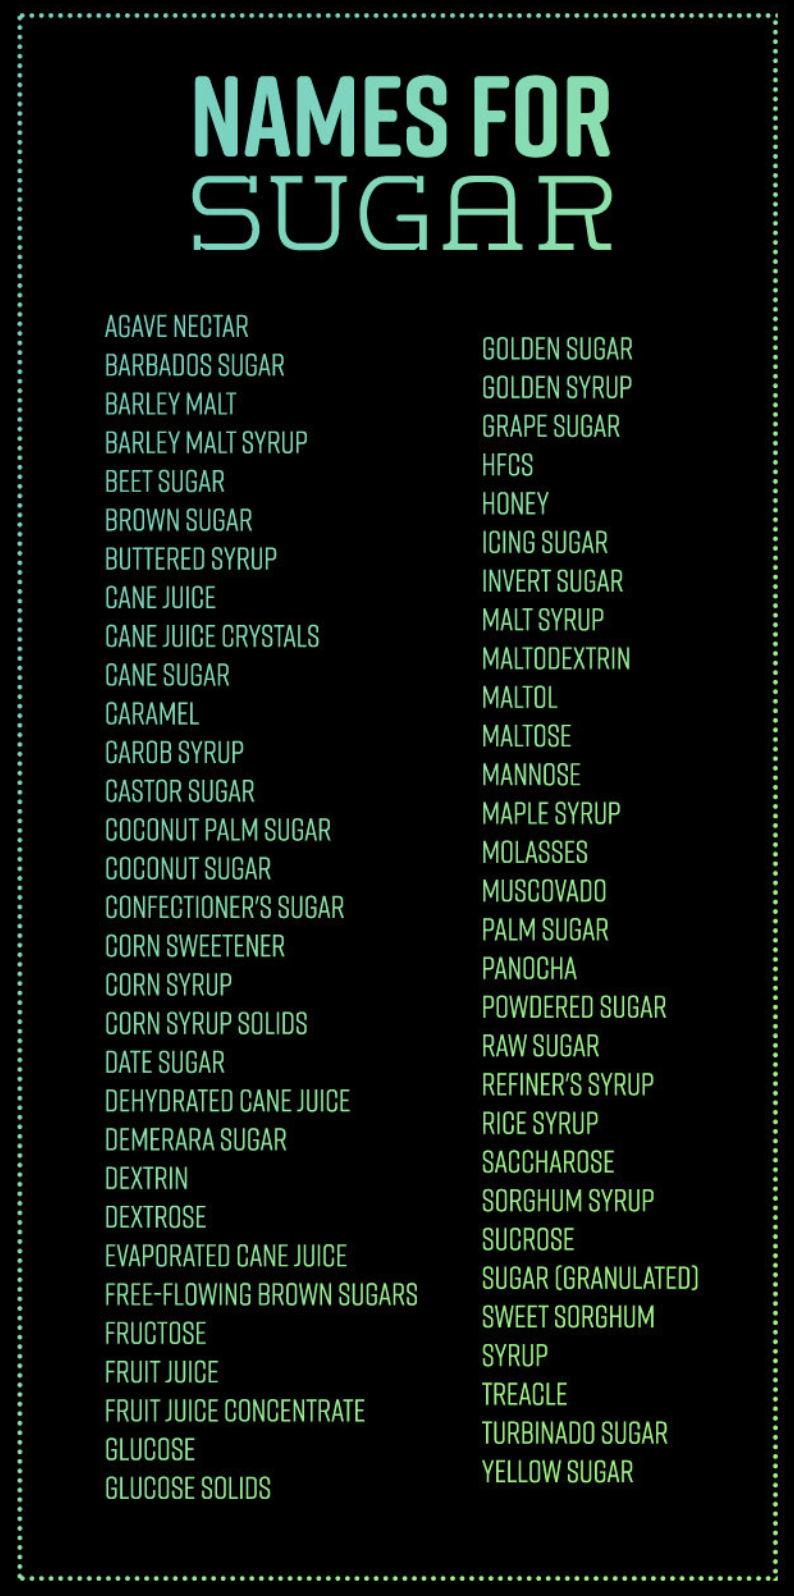 A list of names for sugar on an ingredients label